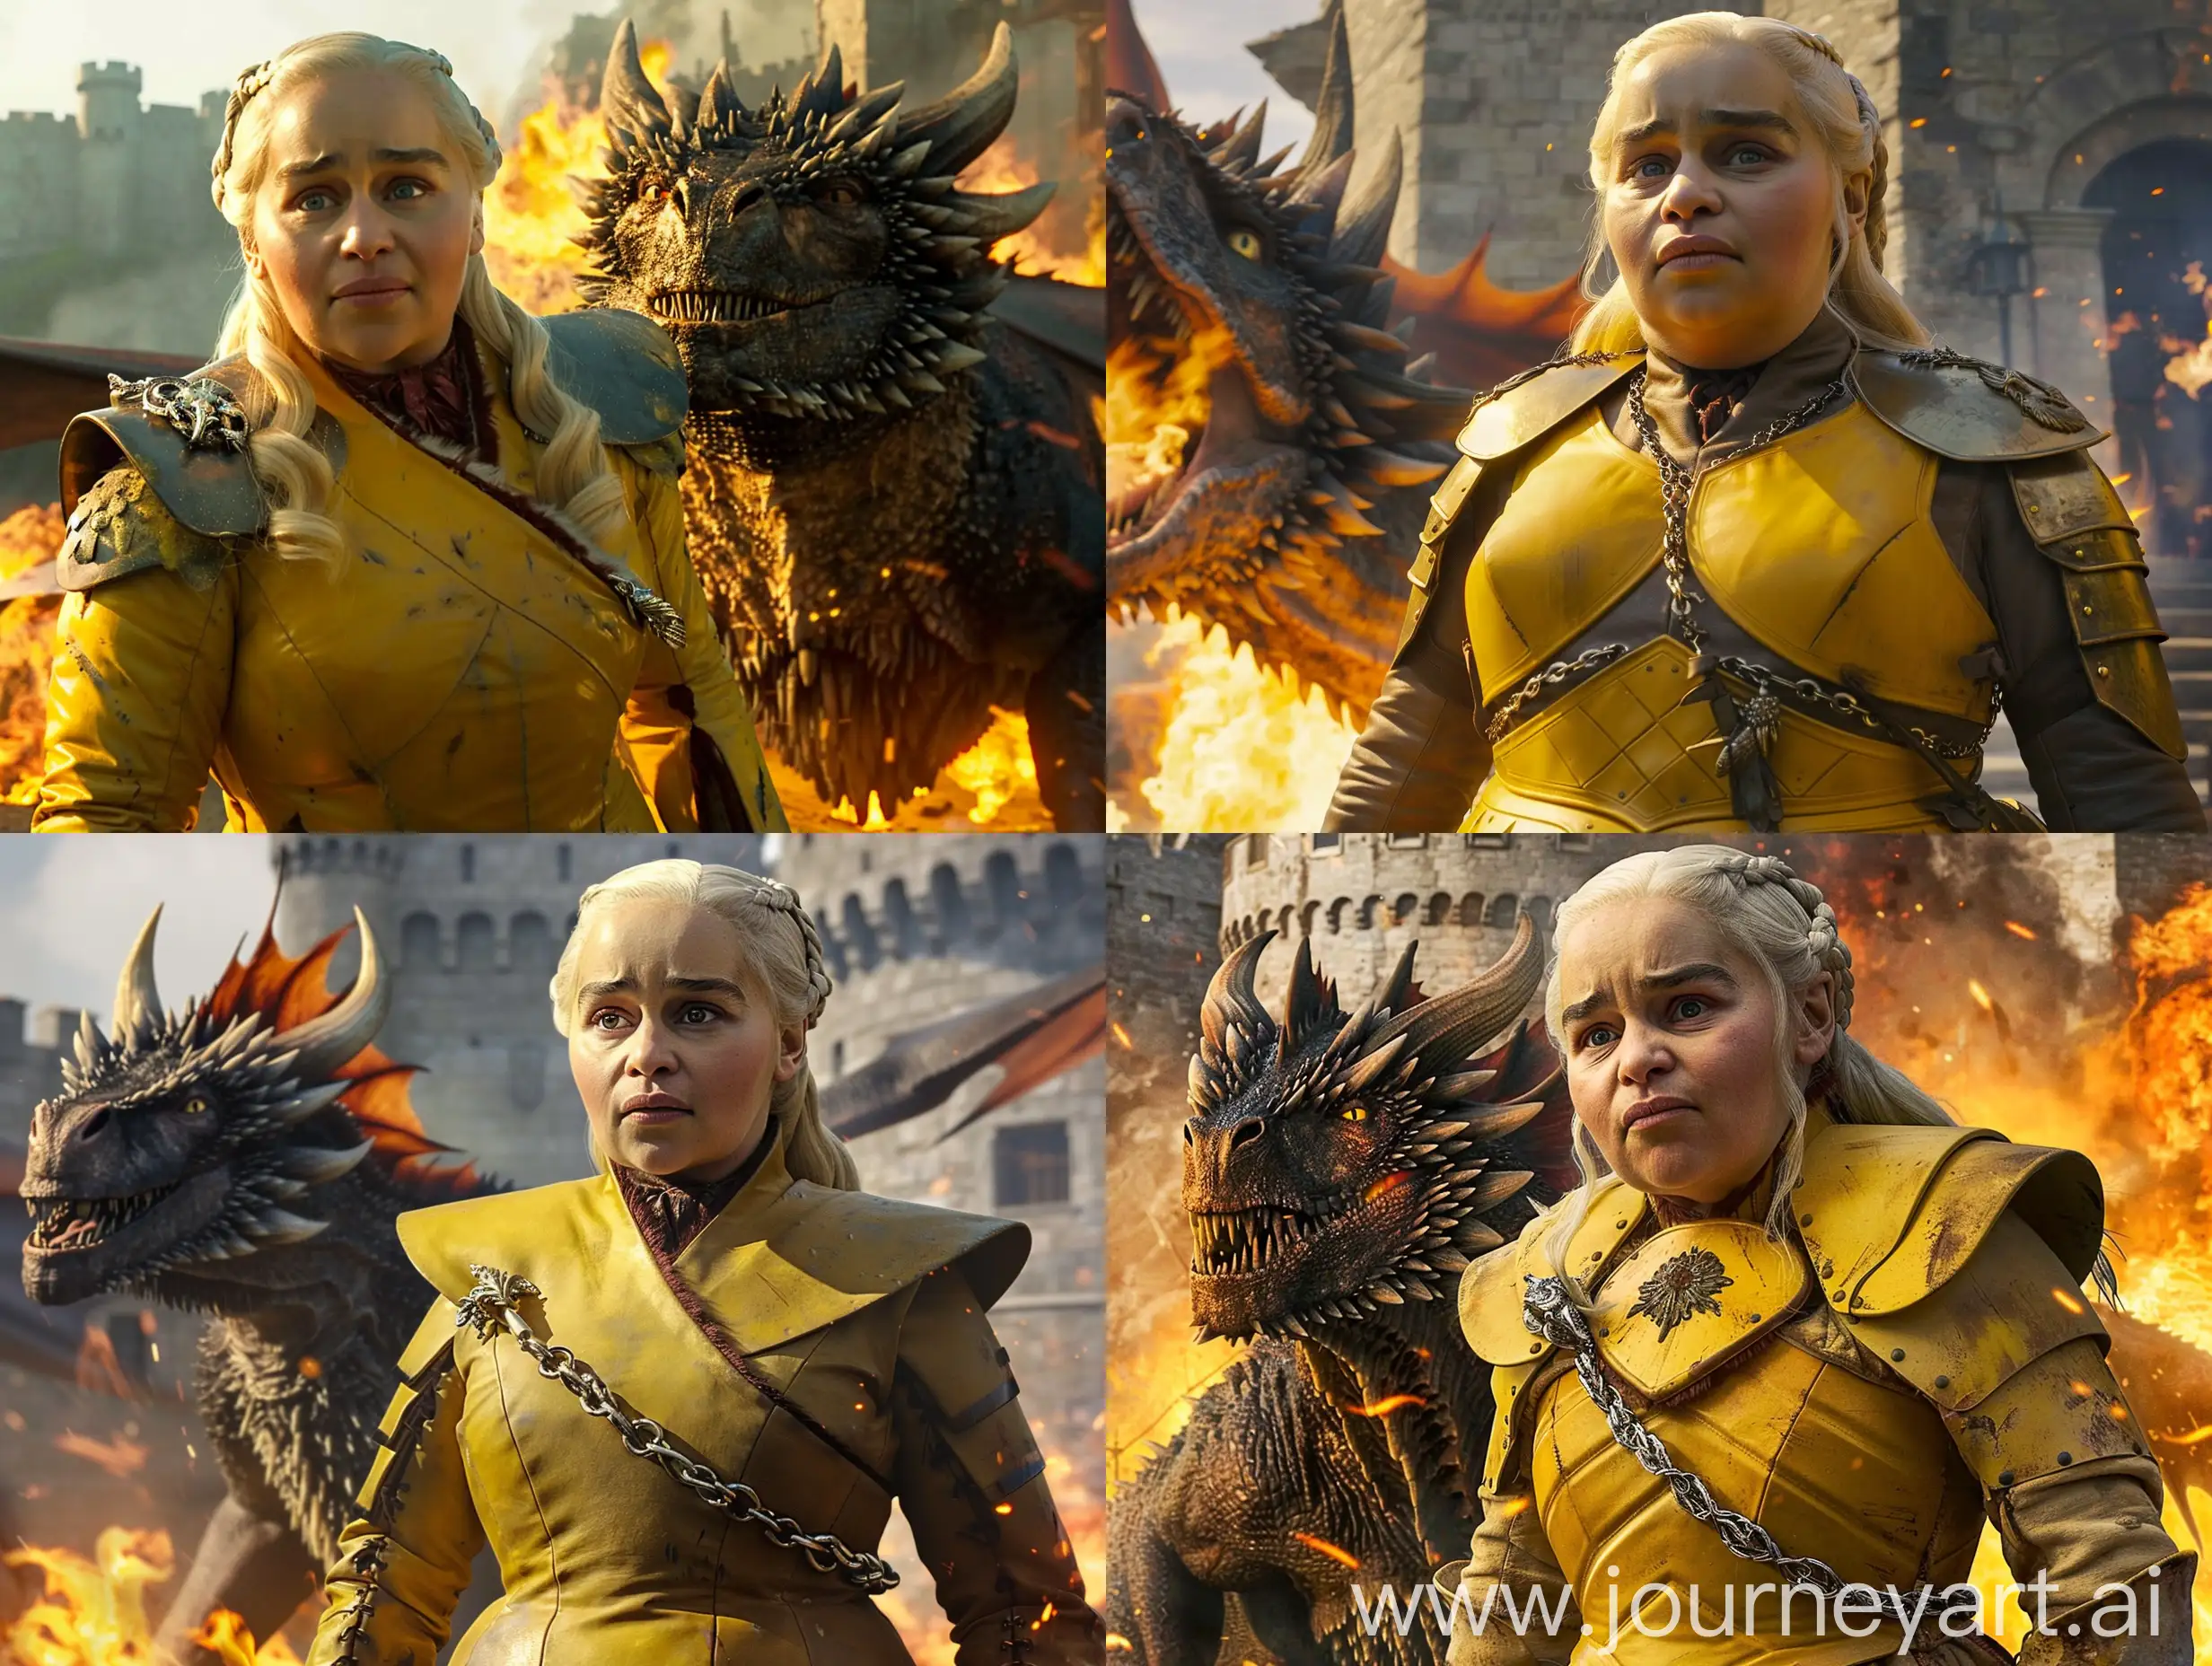 Daenerys Targaryen in the Game of Thrones series, Daenerys Targaryen is very fat and has a very fat face and body, Daenerys Targaryen is wearing yellow military armor, Daenerys Targaryen is standing next to her dragon (the name of the dragon is a dragon), Daenerys Targaryen and Dragon by surrounded by flames, the background is Winterfell Castle, Daenerys Targaryen looks at the camera with a determined expression, the lighting is classical, q2